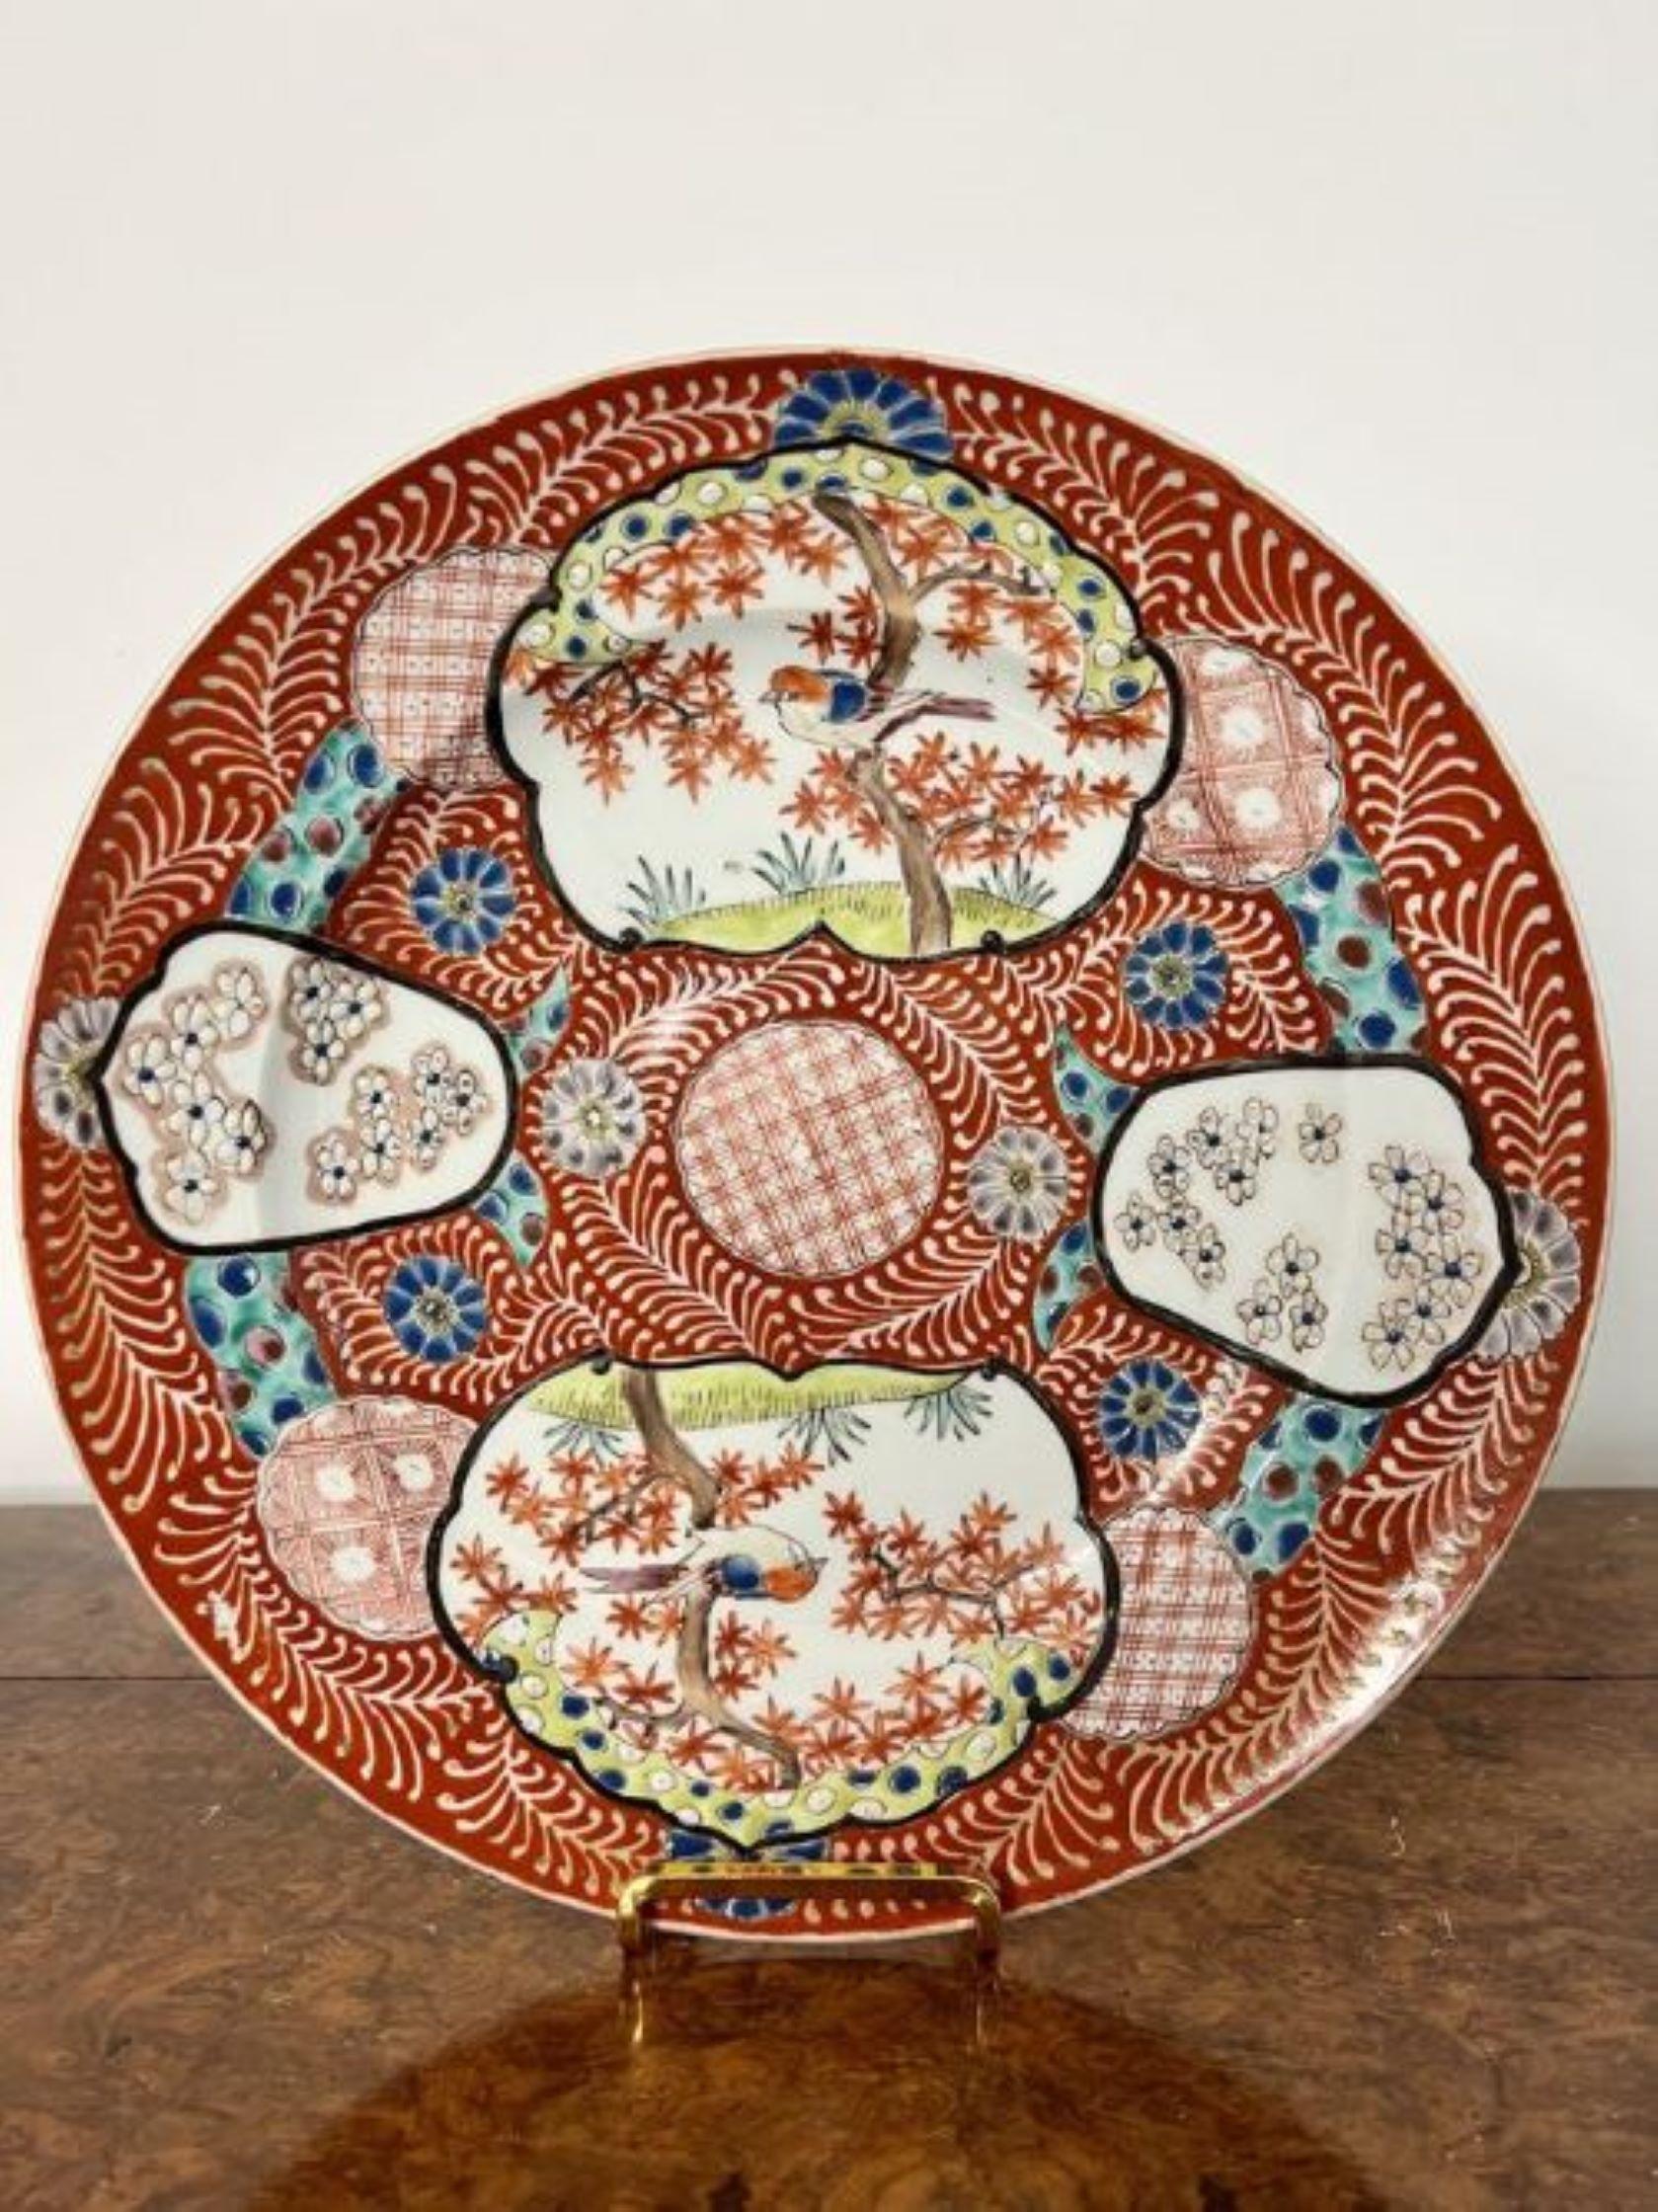 Quality antique Chinese porcelain plate having a quality antique Chinese plate decorated with birds, trees and flowers in fantastic red, blue, green and white colours.